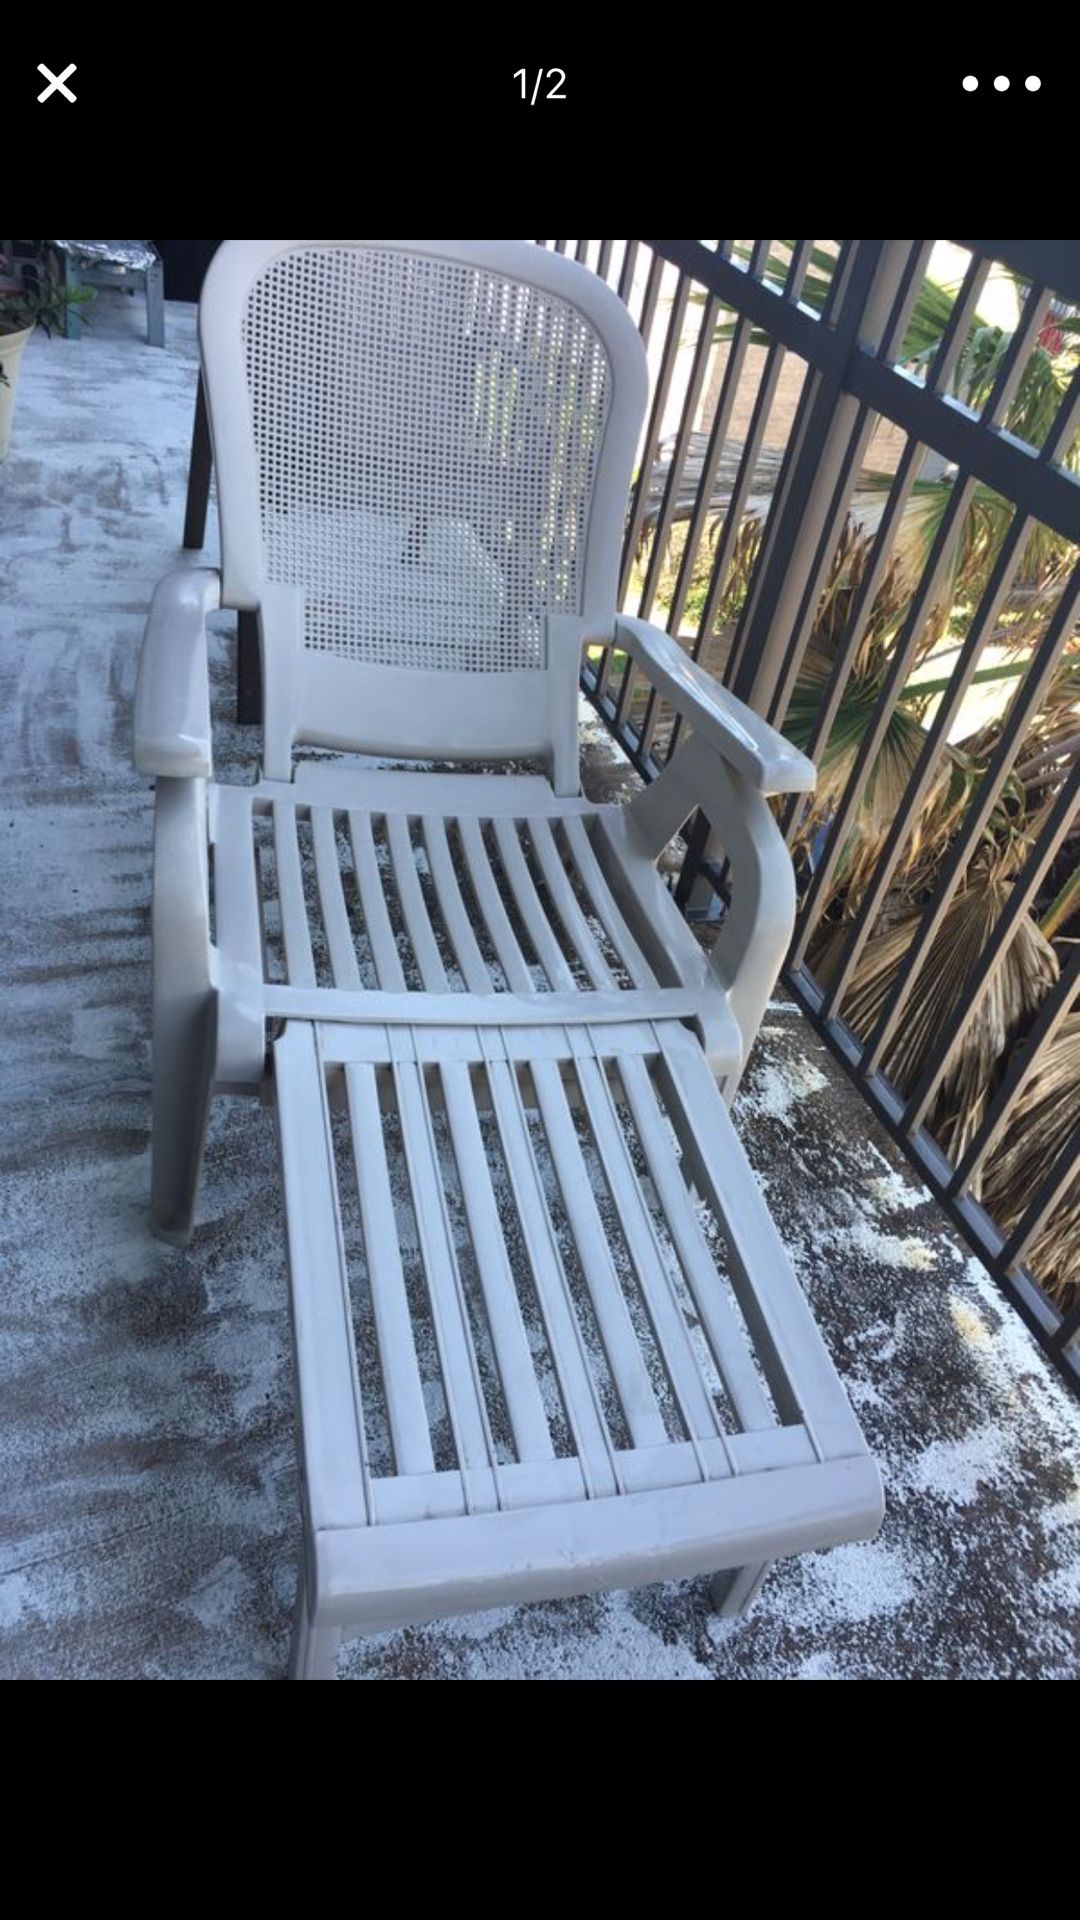 2 new pool or patio chairs only for $40 good deal